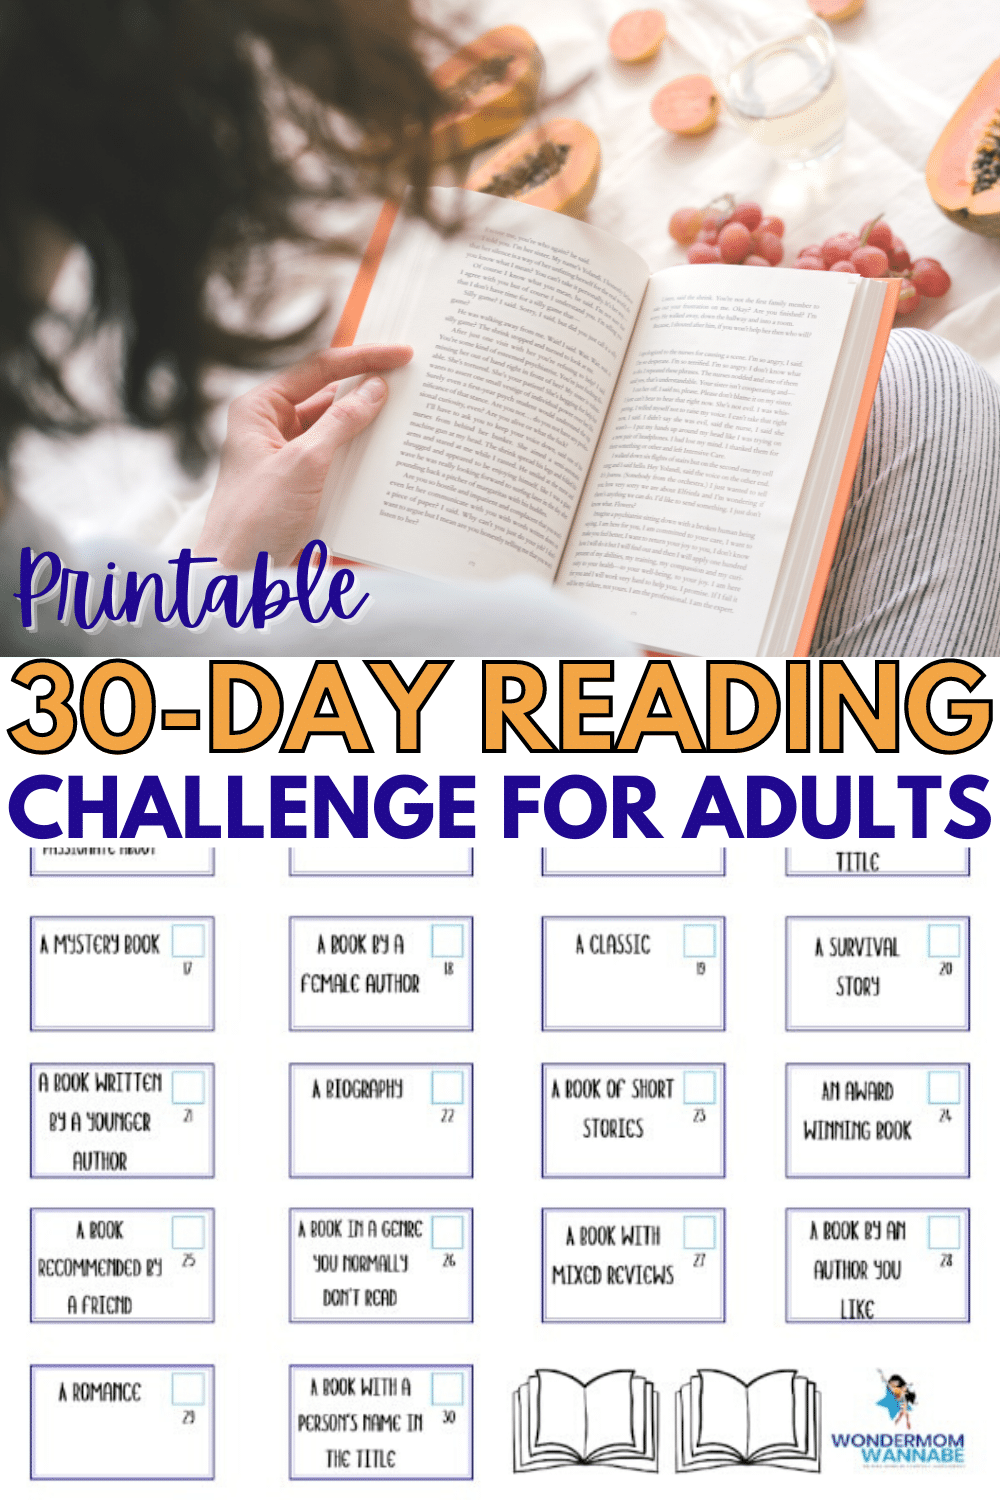 This printable 30 Day Reading Challenge will help you get out of your reading rut. Trying out new authors and genres will make reading fun again. #reading #30daychallenge #printables via @wondermomwannab